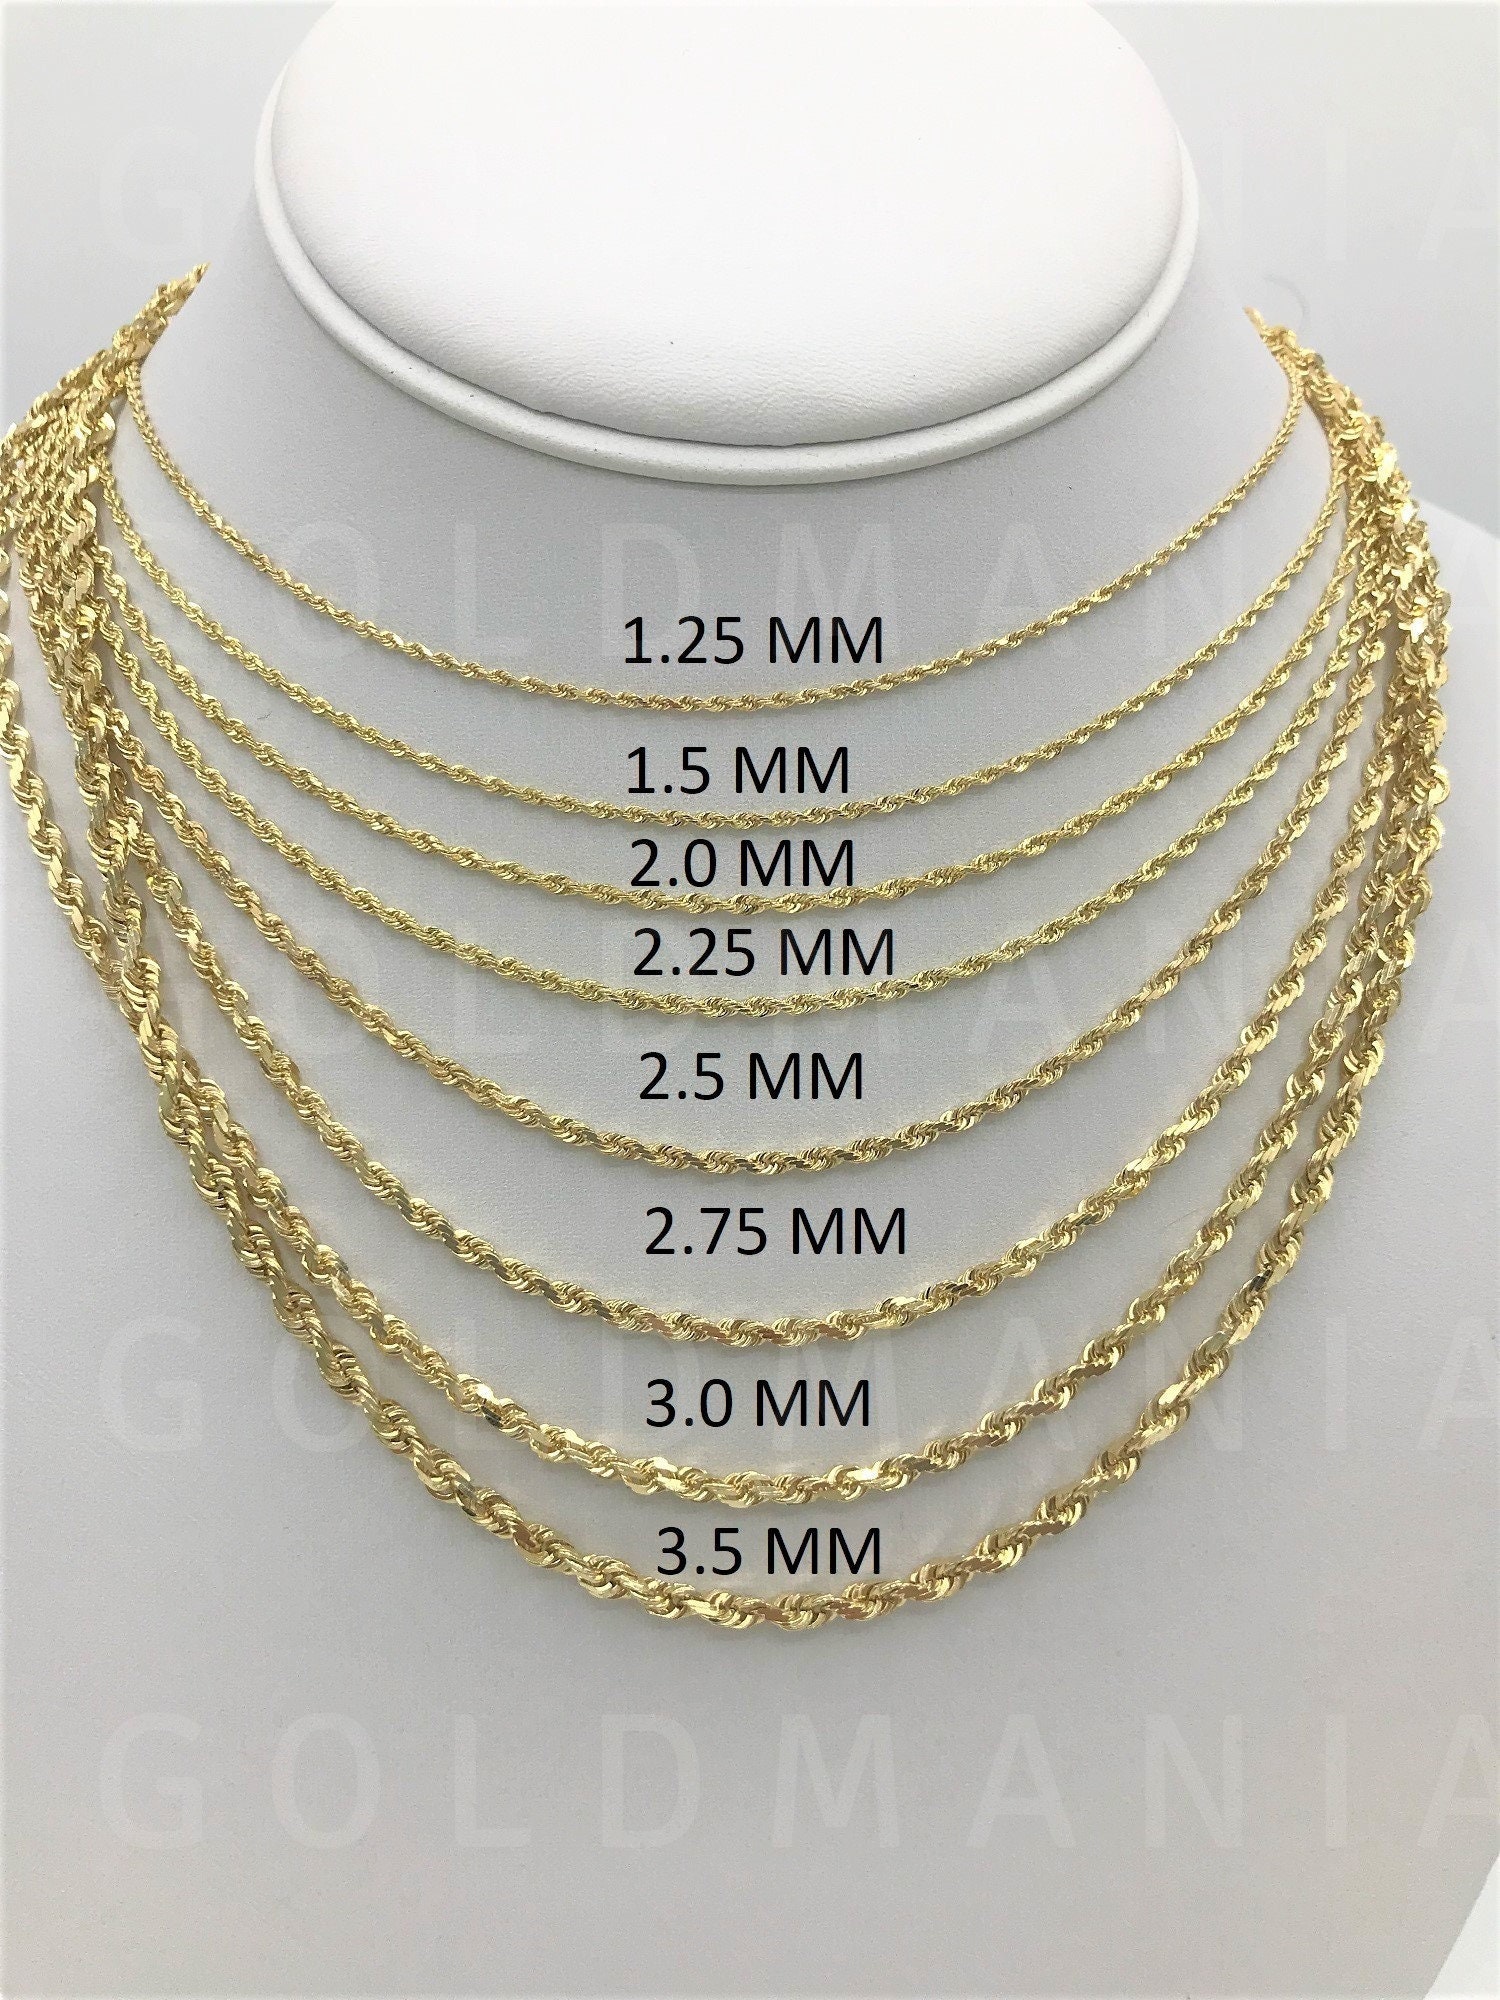 10K Solid Yellow Gold Diamond Cut Rope Chain Necklace - Etsy